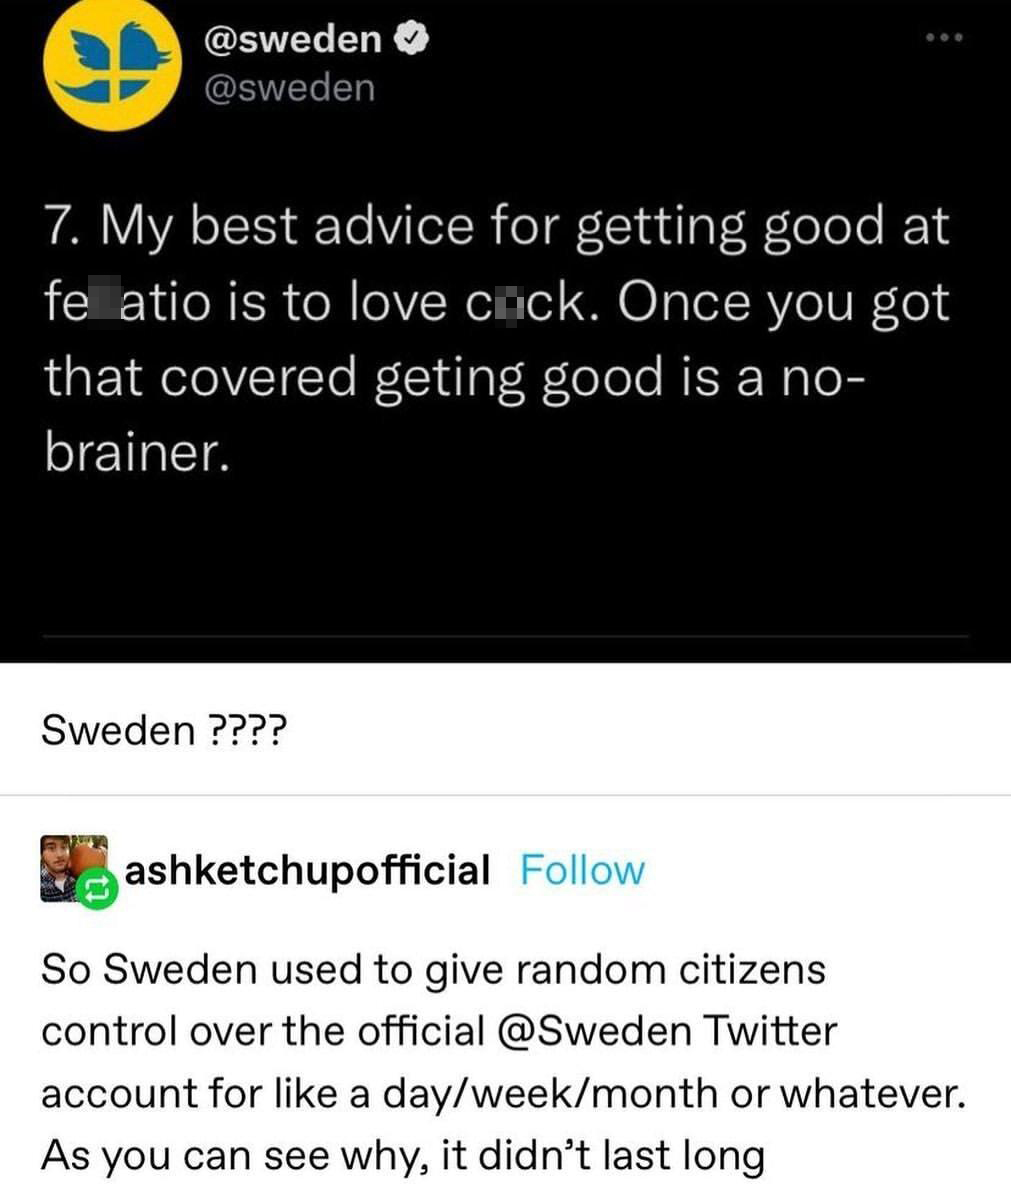 screenshot - 7. My best advice for getting good at fe atio is to love cuck. Once you got that covered geting good is a no brainer. Sweden ???? ashketchupofficial So Sweden used to give random citizens control over the official Twitter account for a daywee